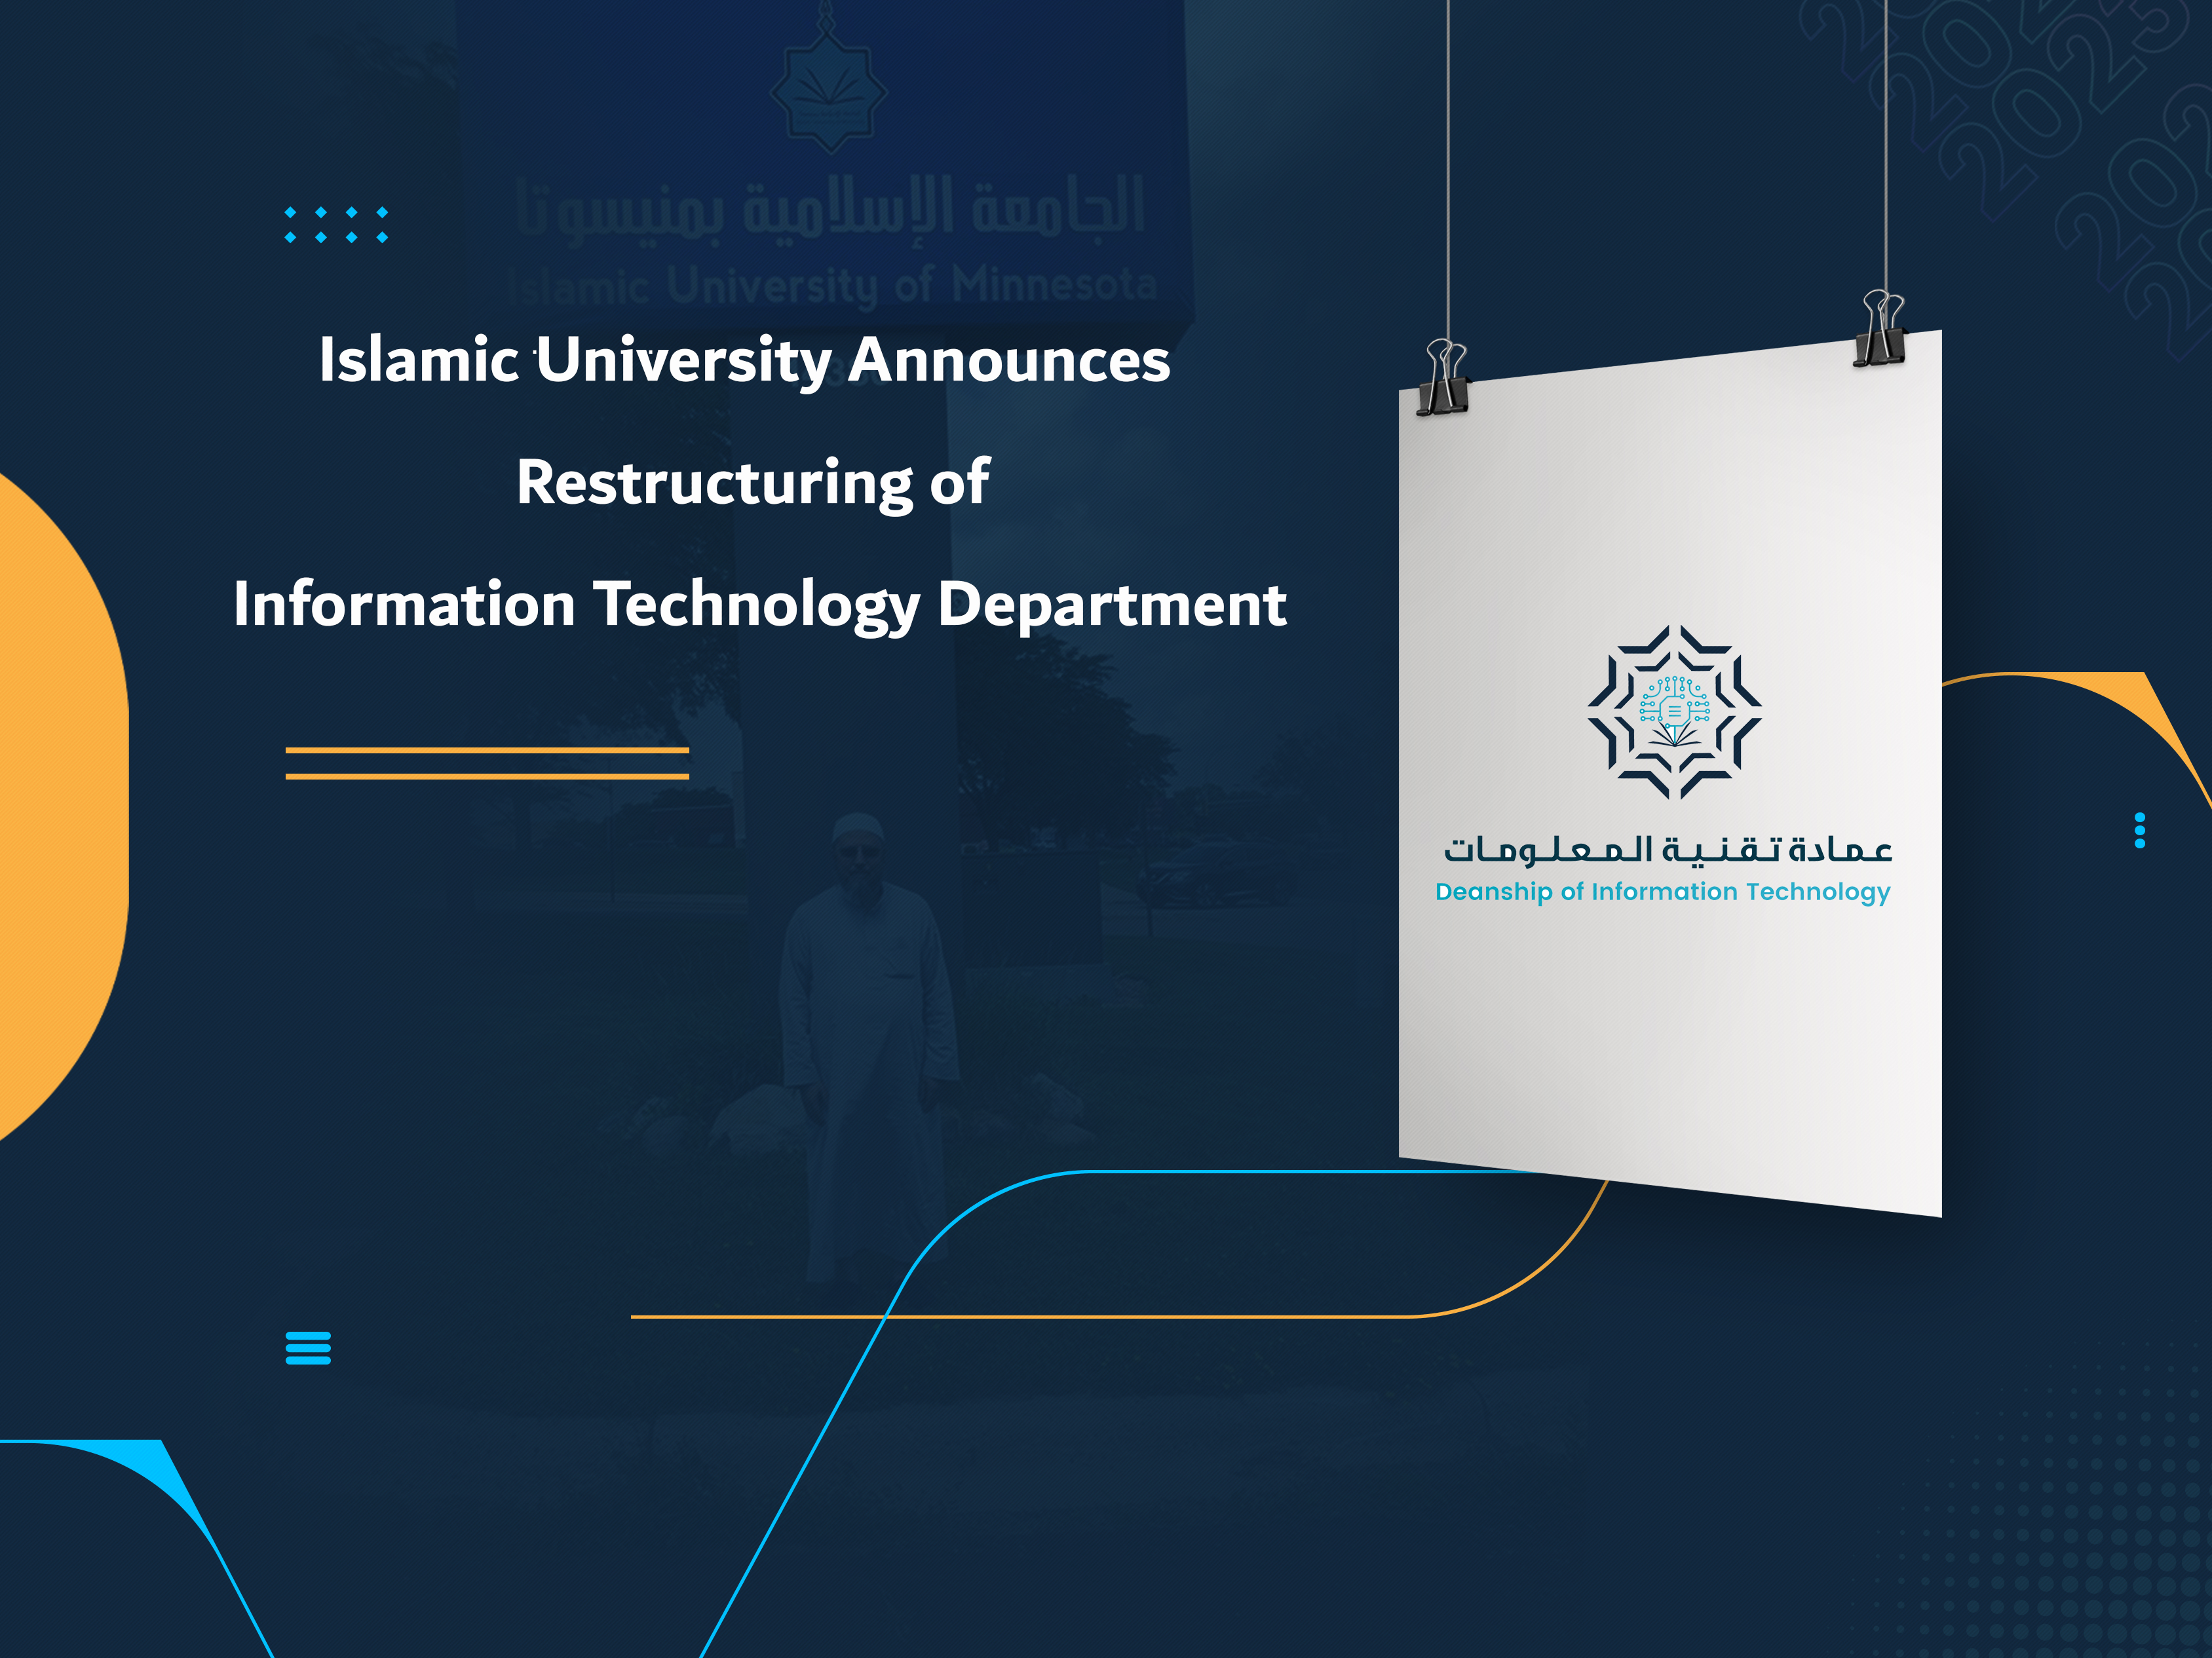 Islamic University Announces Restructuring of Information Technology Department